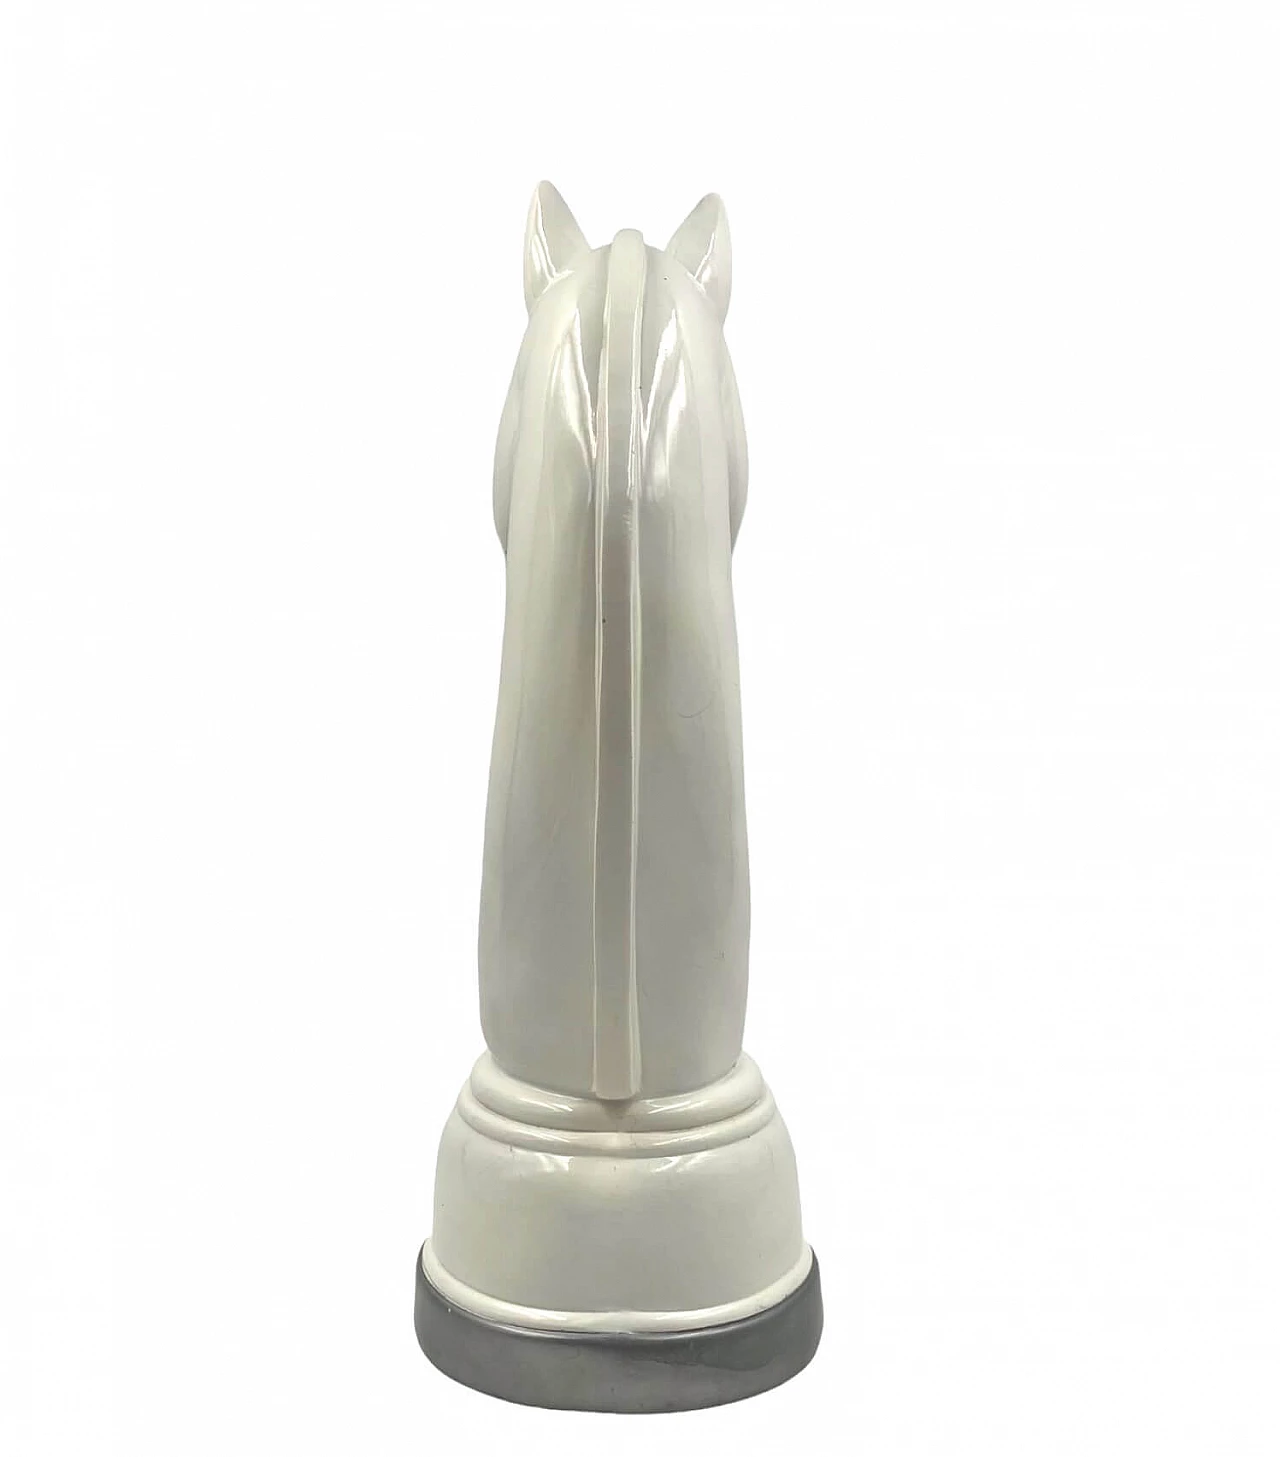 Chess horse, white lacquered resin sculpture, 1970s 17